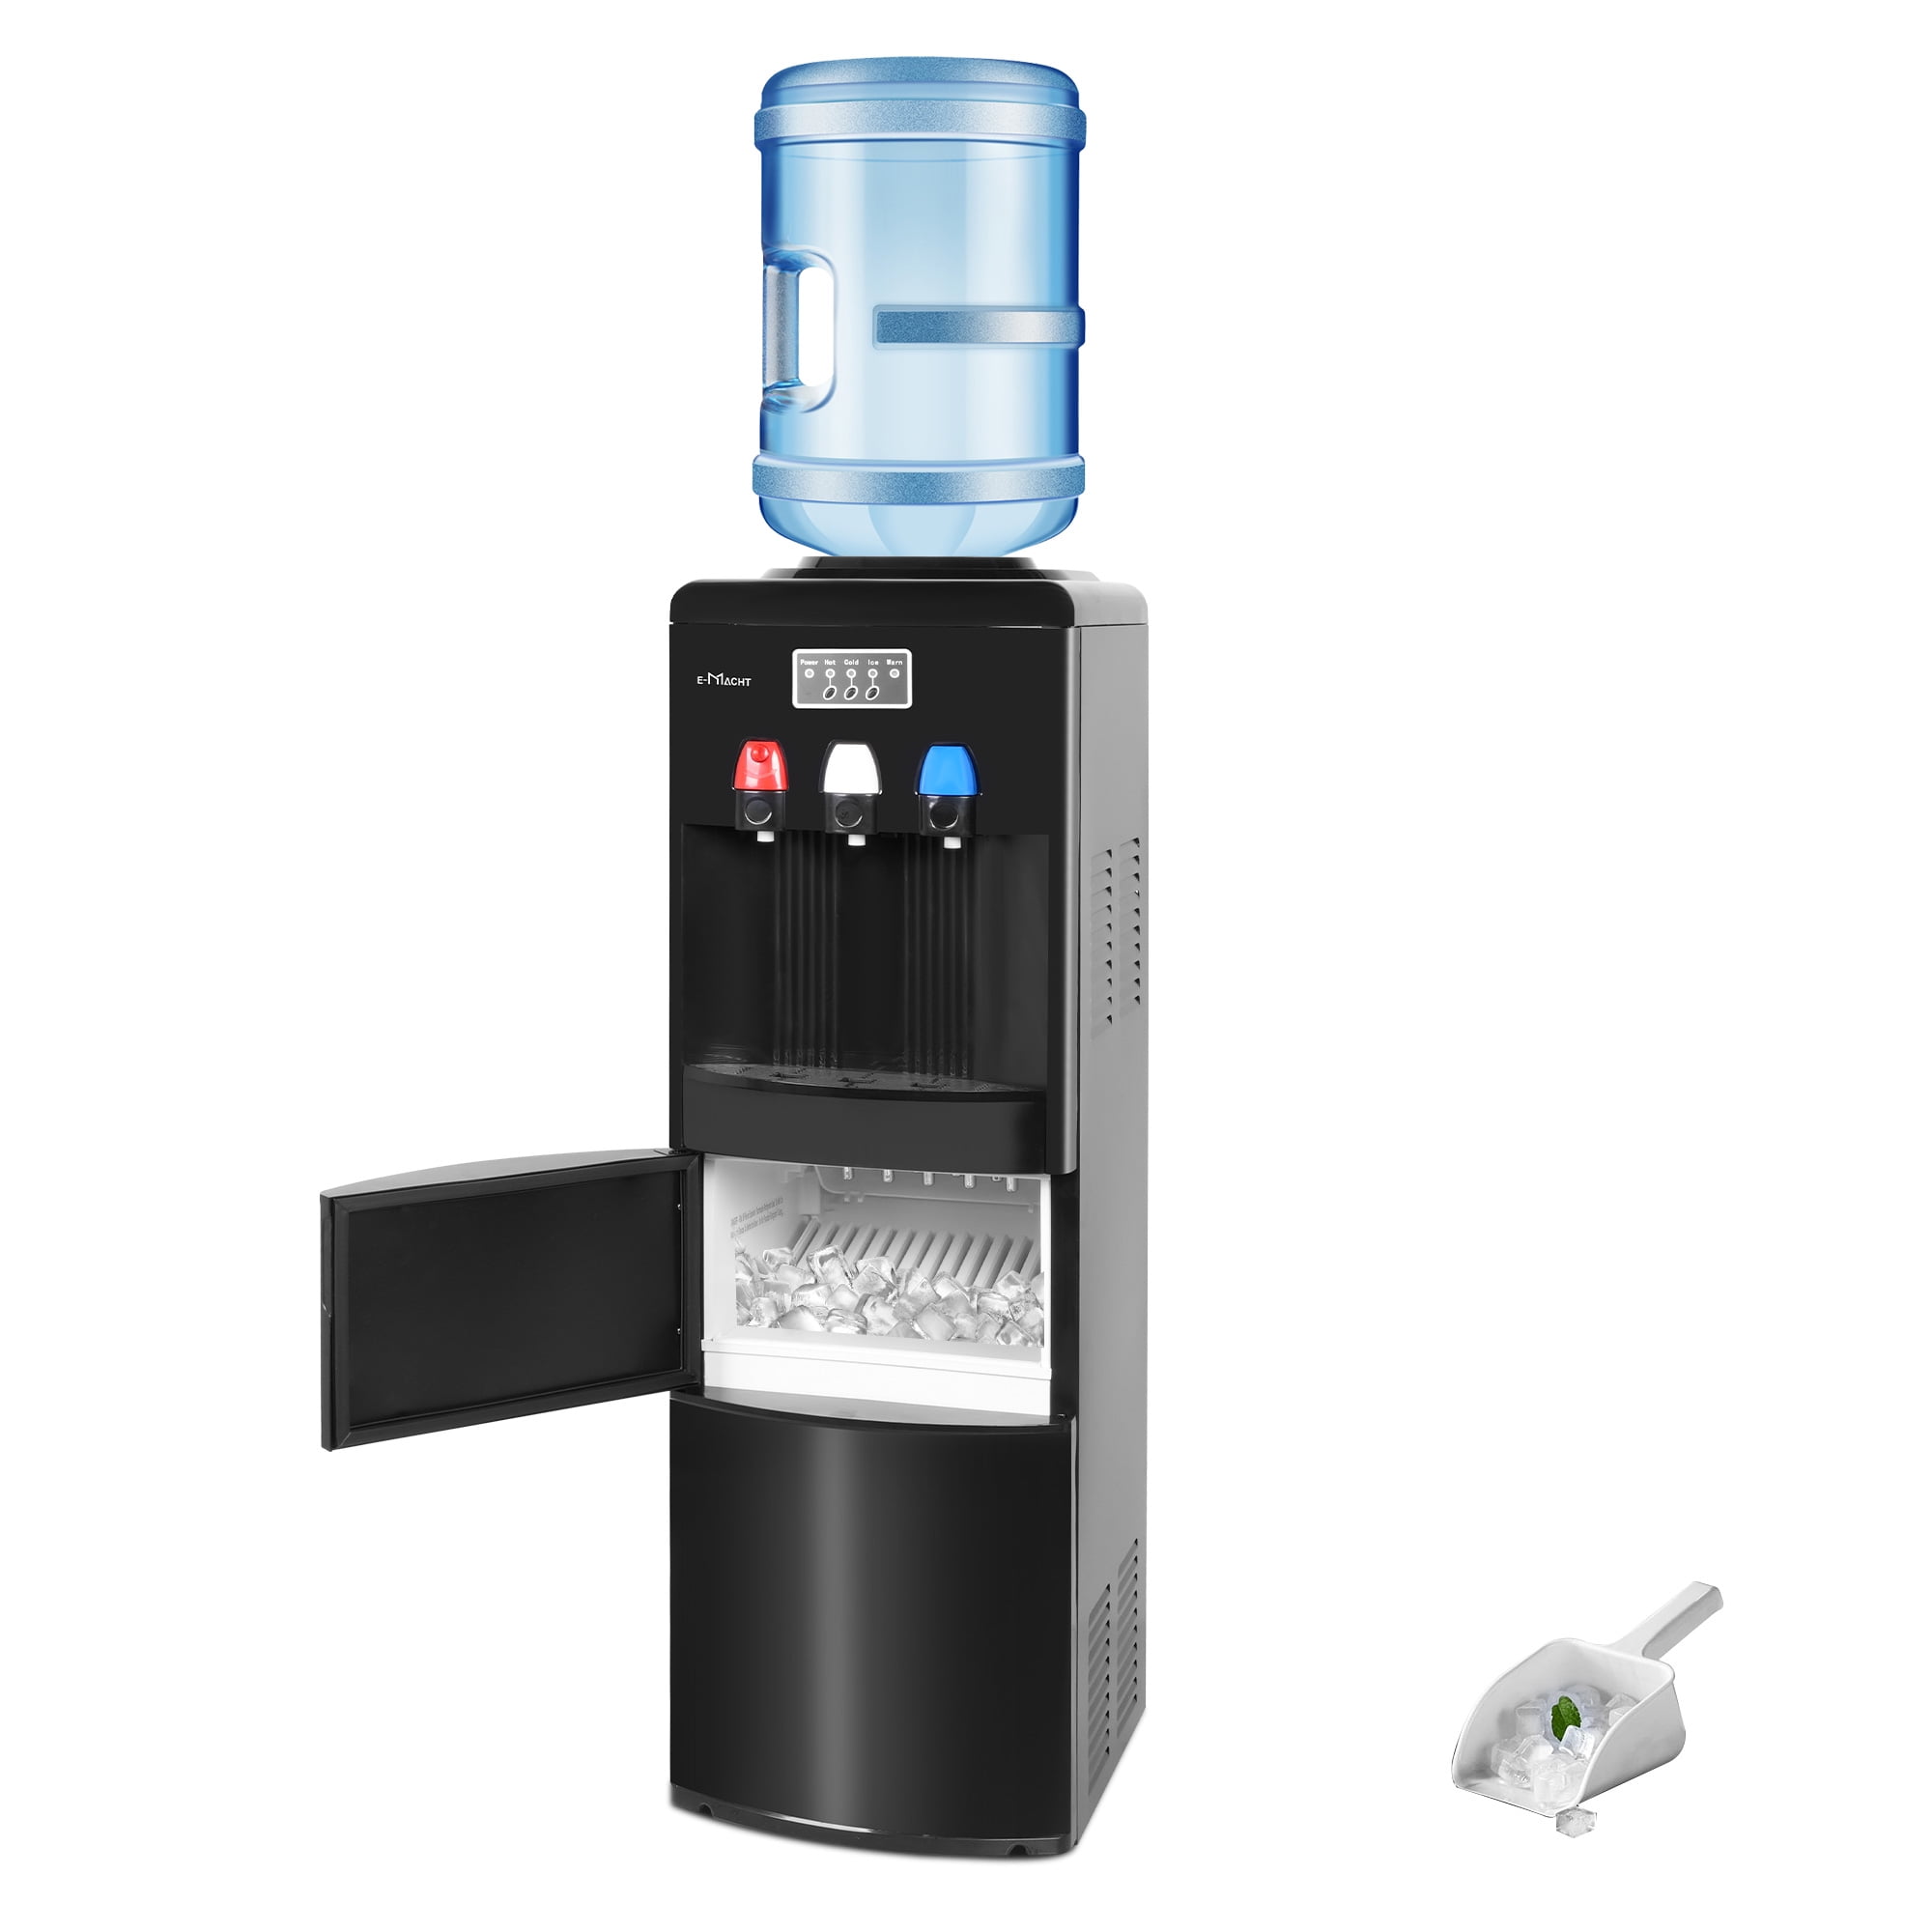 GOFLAME Water Cooler Dispenser Top Loading, Water Dispenser with Hot & Cold  Water, Storage Cabinet, Child Safety Lock, Holds 3-5 Gallon Bottles for